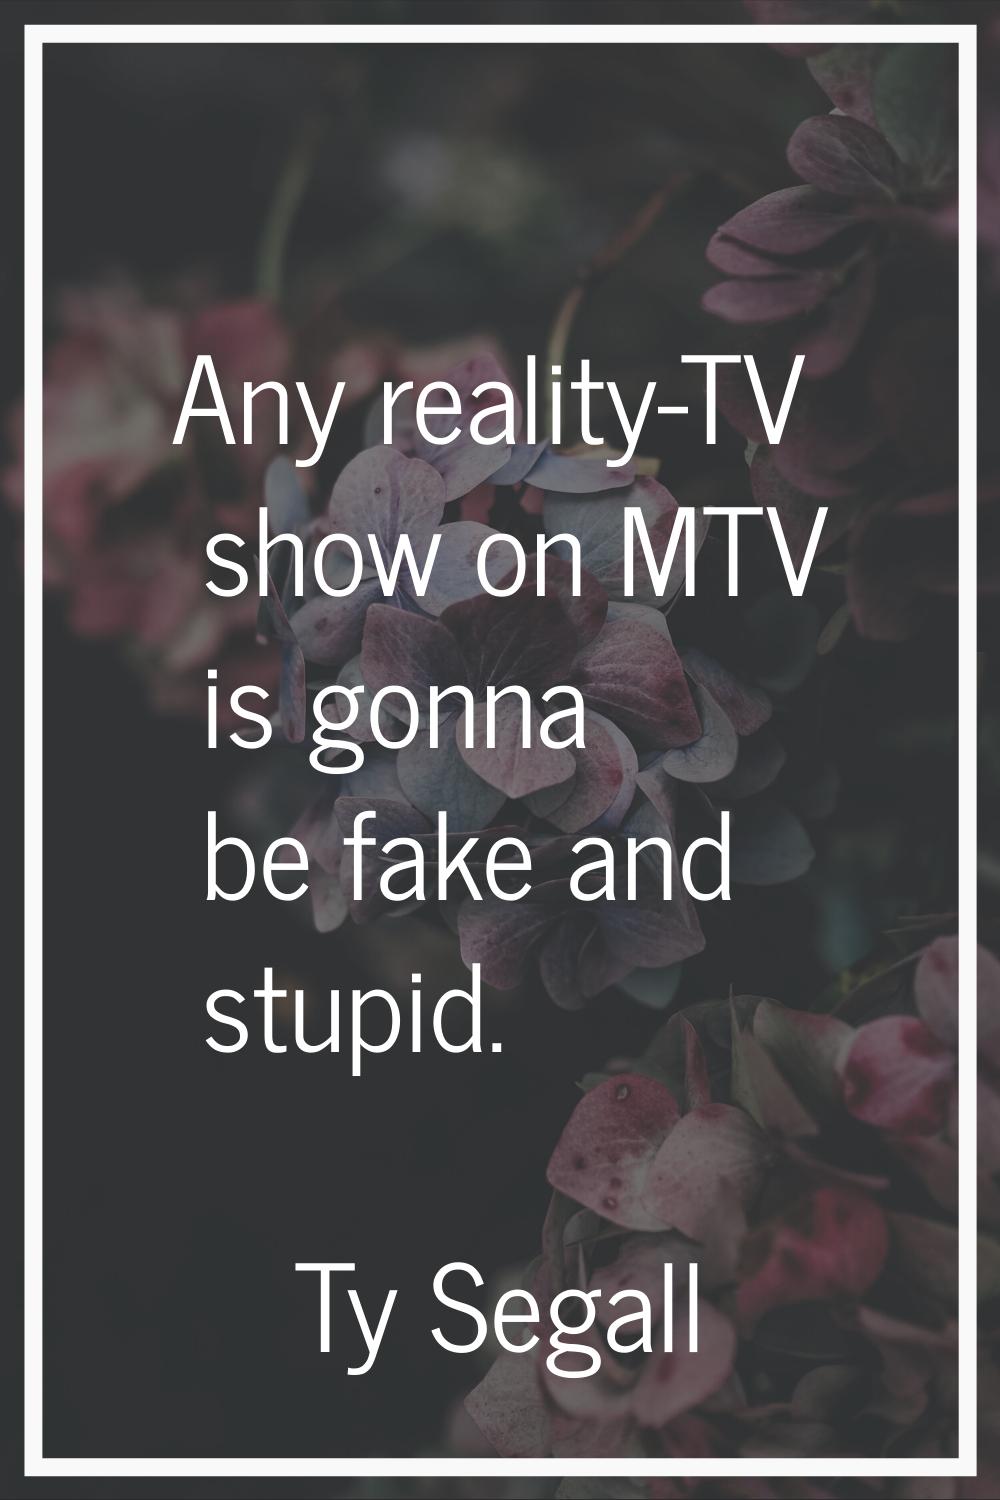 Any reality-TV show on MTV is gonna be fake and stupid.